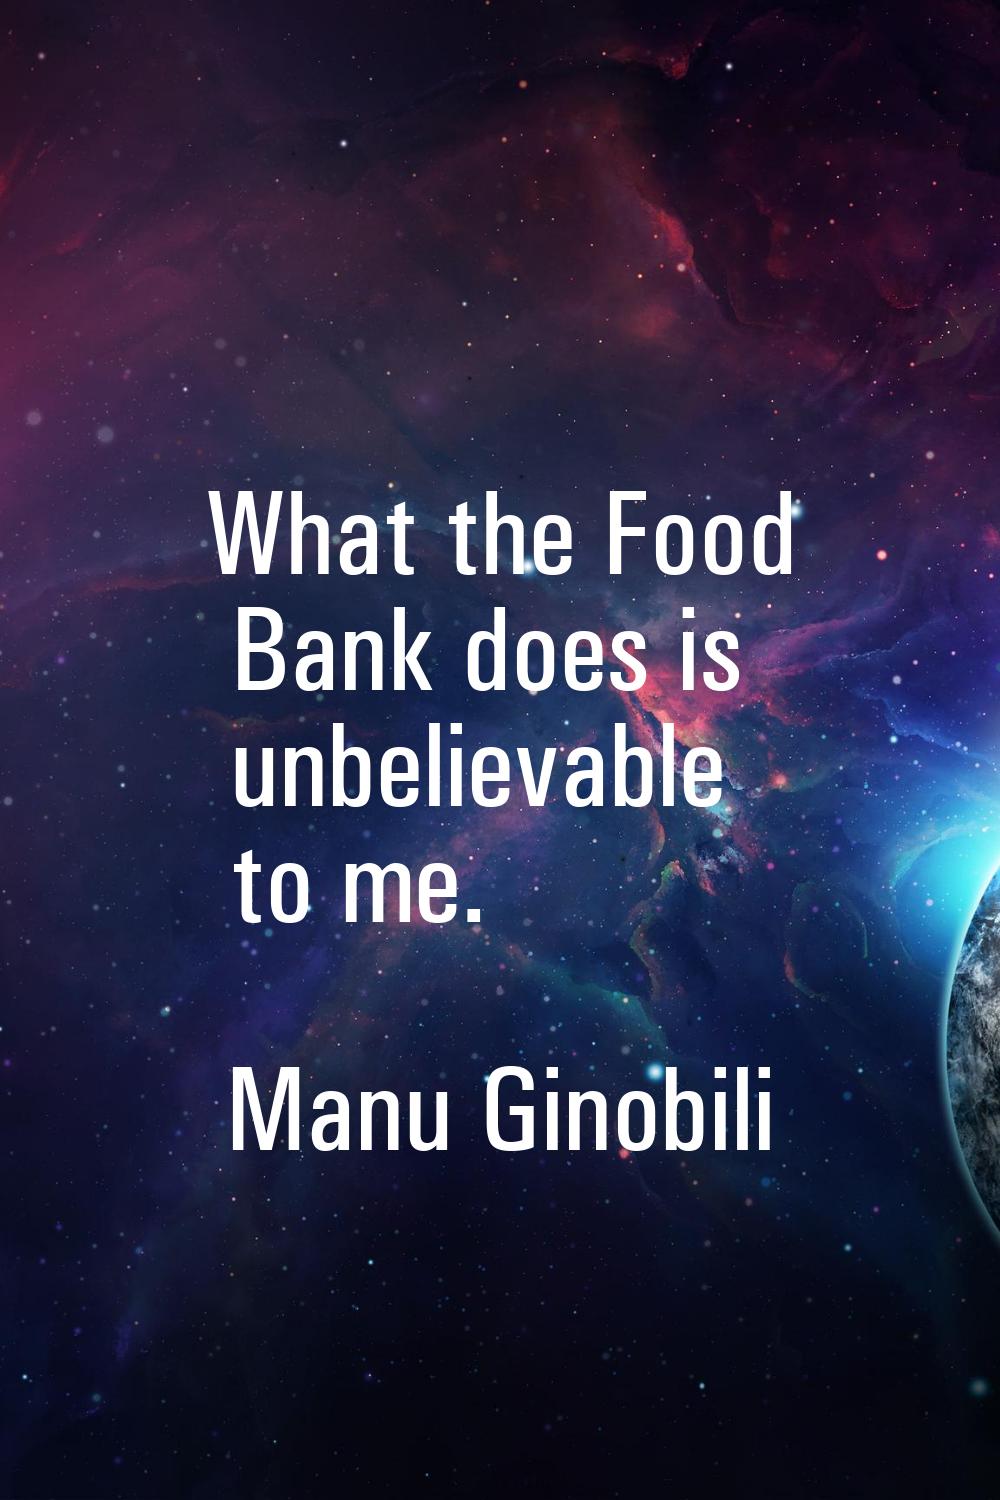 What the Food Bank does is unbelievable to me.